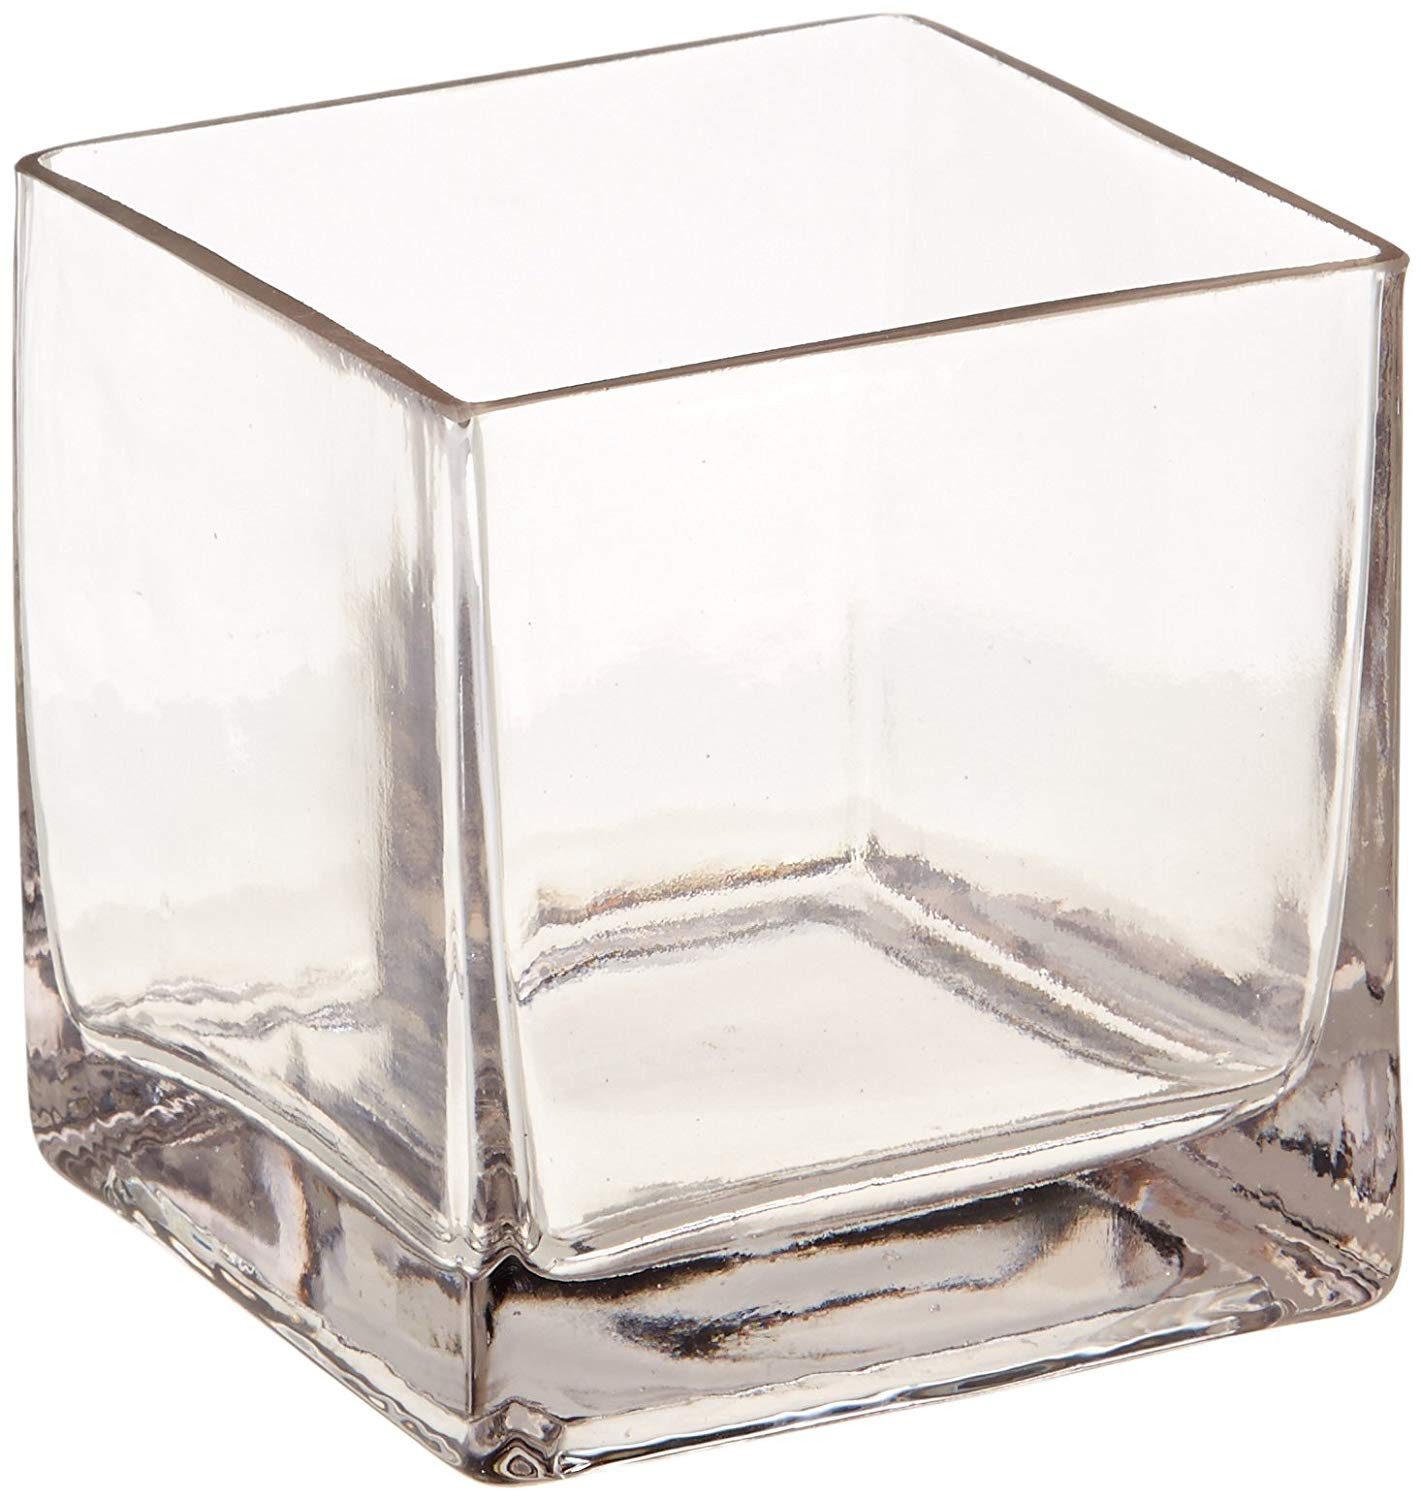 10 Lovable Amazon Clear Glass Vases 2024 free download amazon clear glass vases of amazon com 12piece 4 square crystal clear glass vase home kitchen inside 71 jezfmvnl sl1500